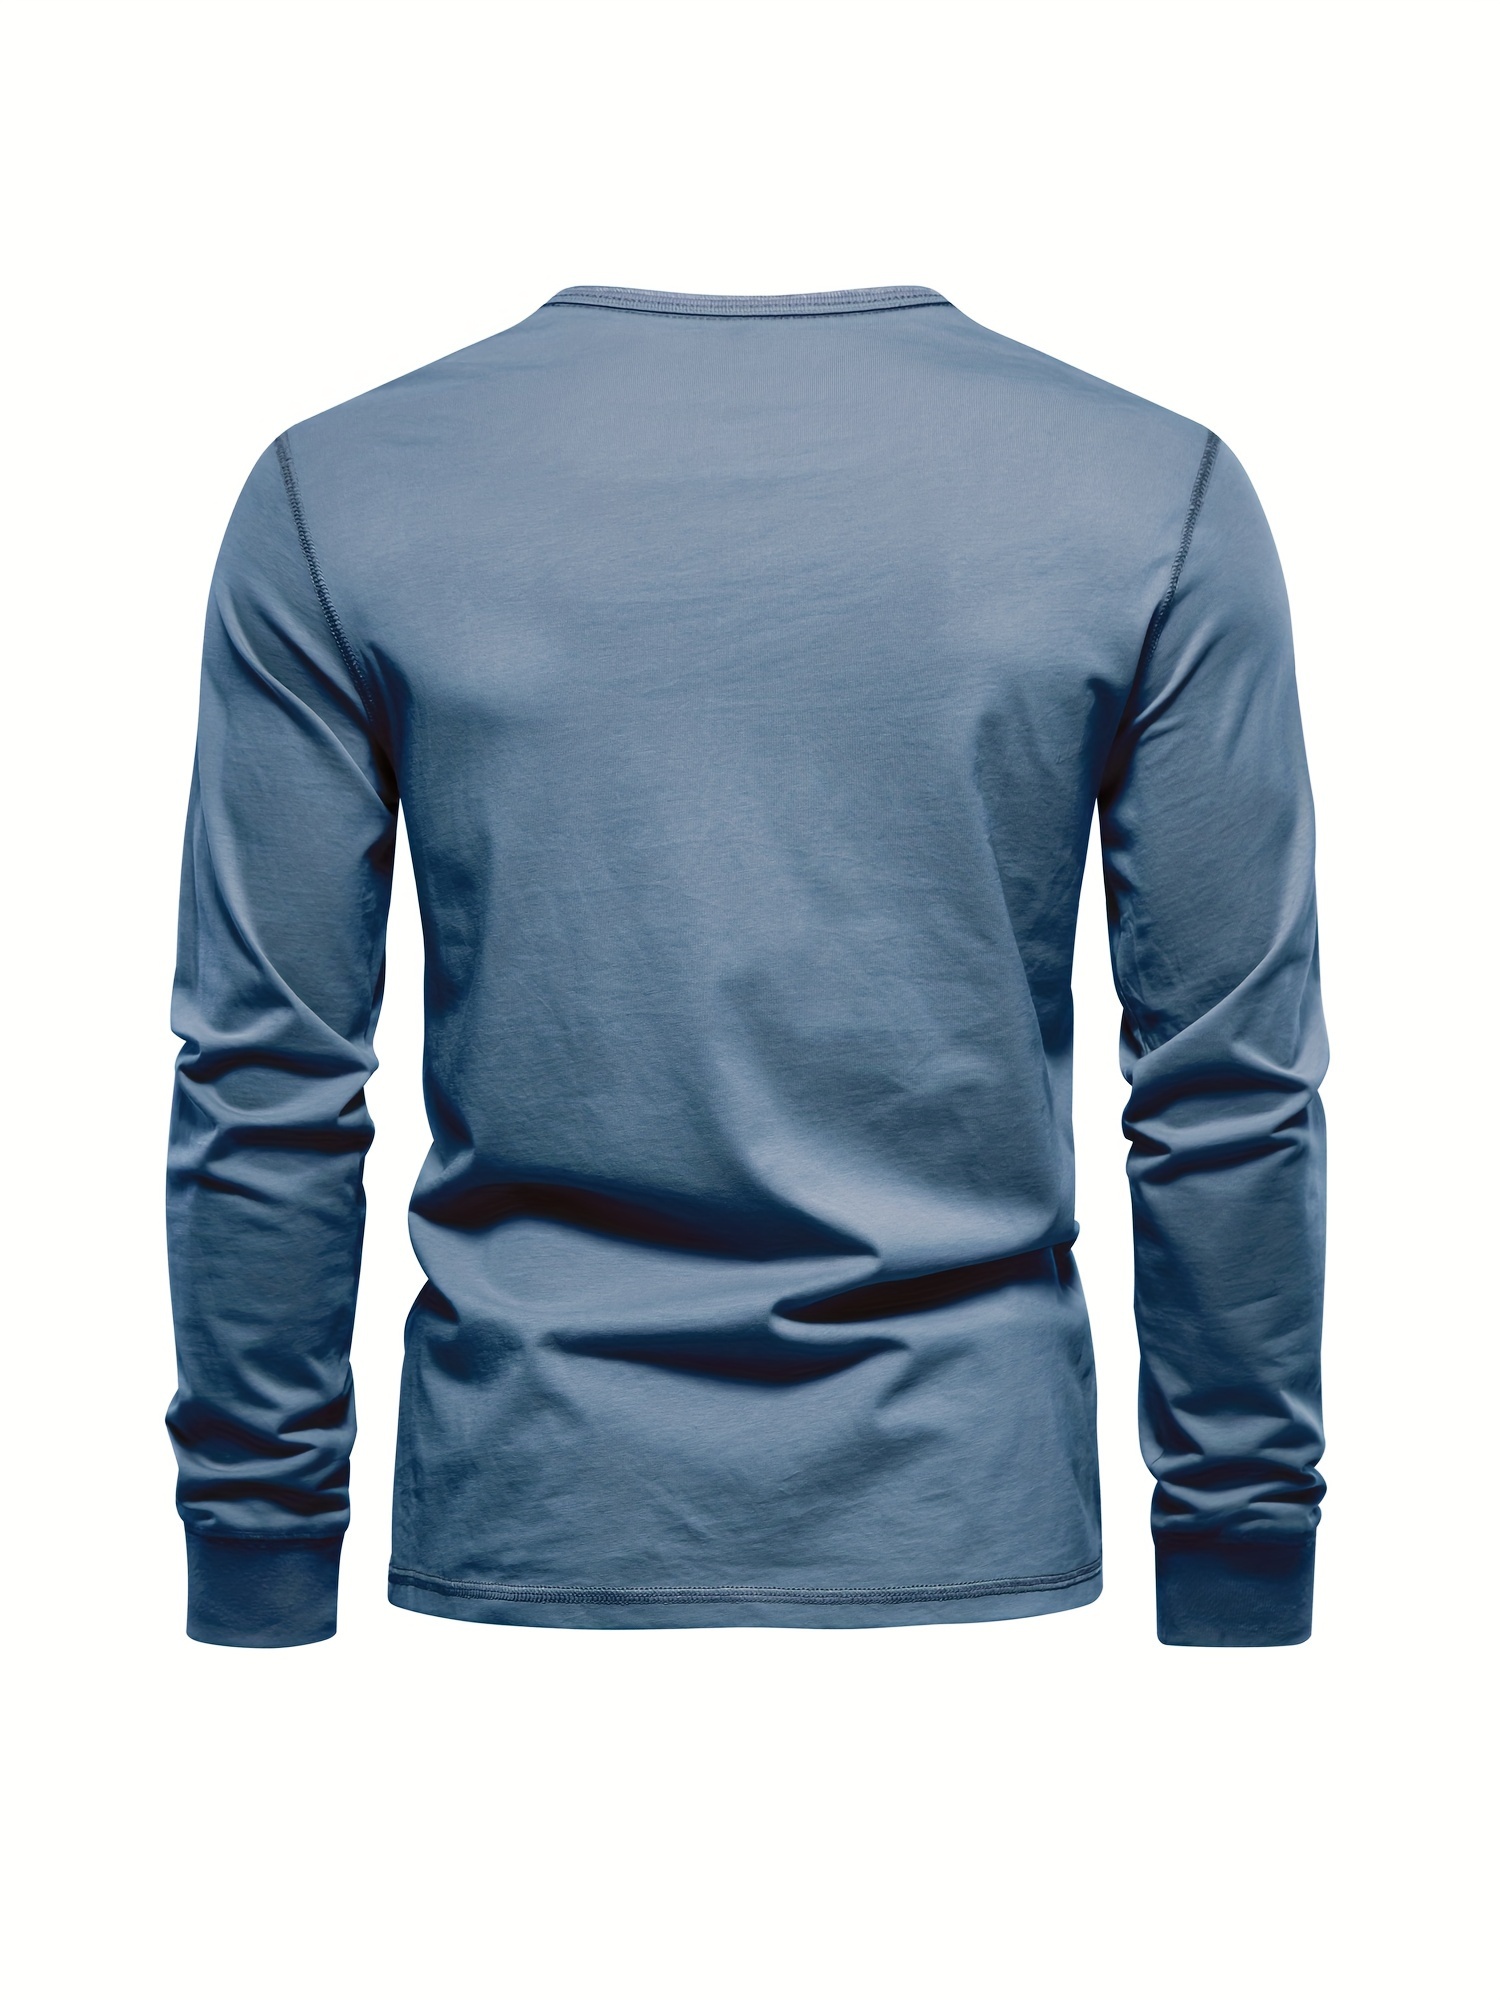 Mens Casual Long Sleeve Henley Shirt Fashion Front Placket Slim-Fit T-Shirts